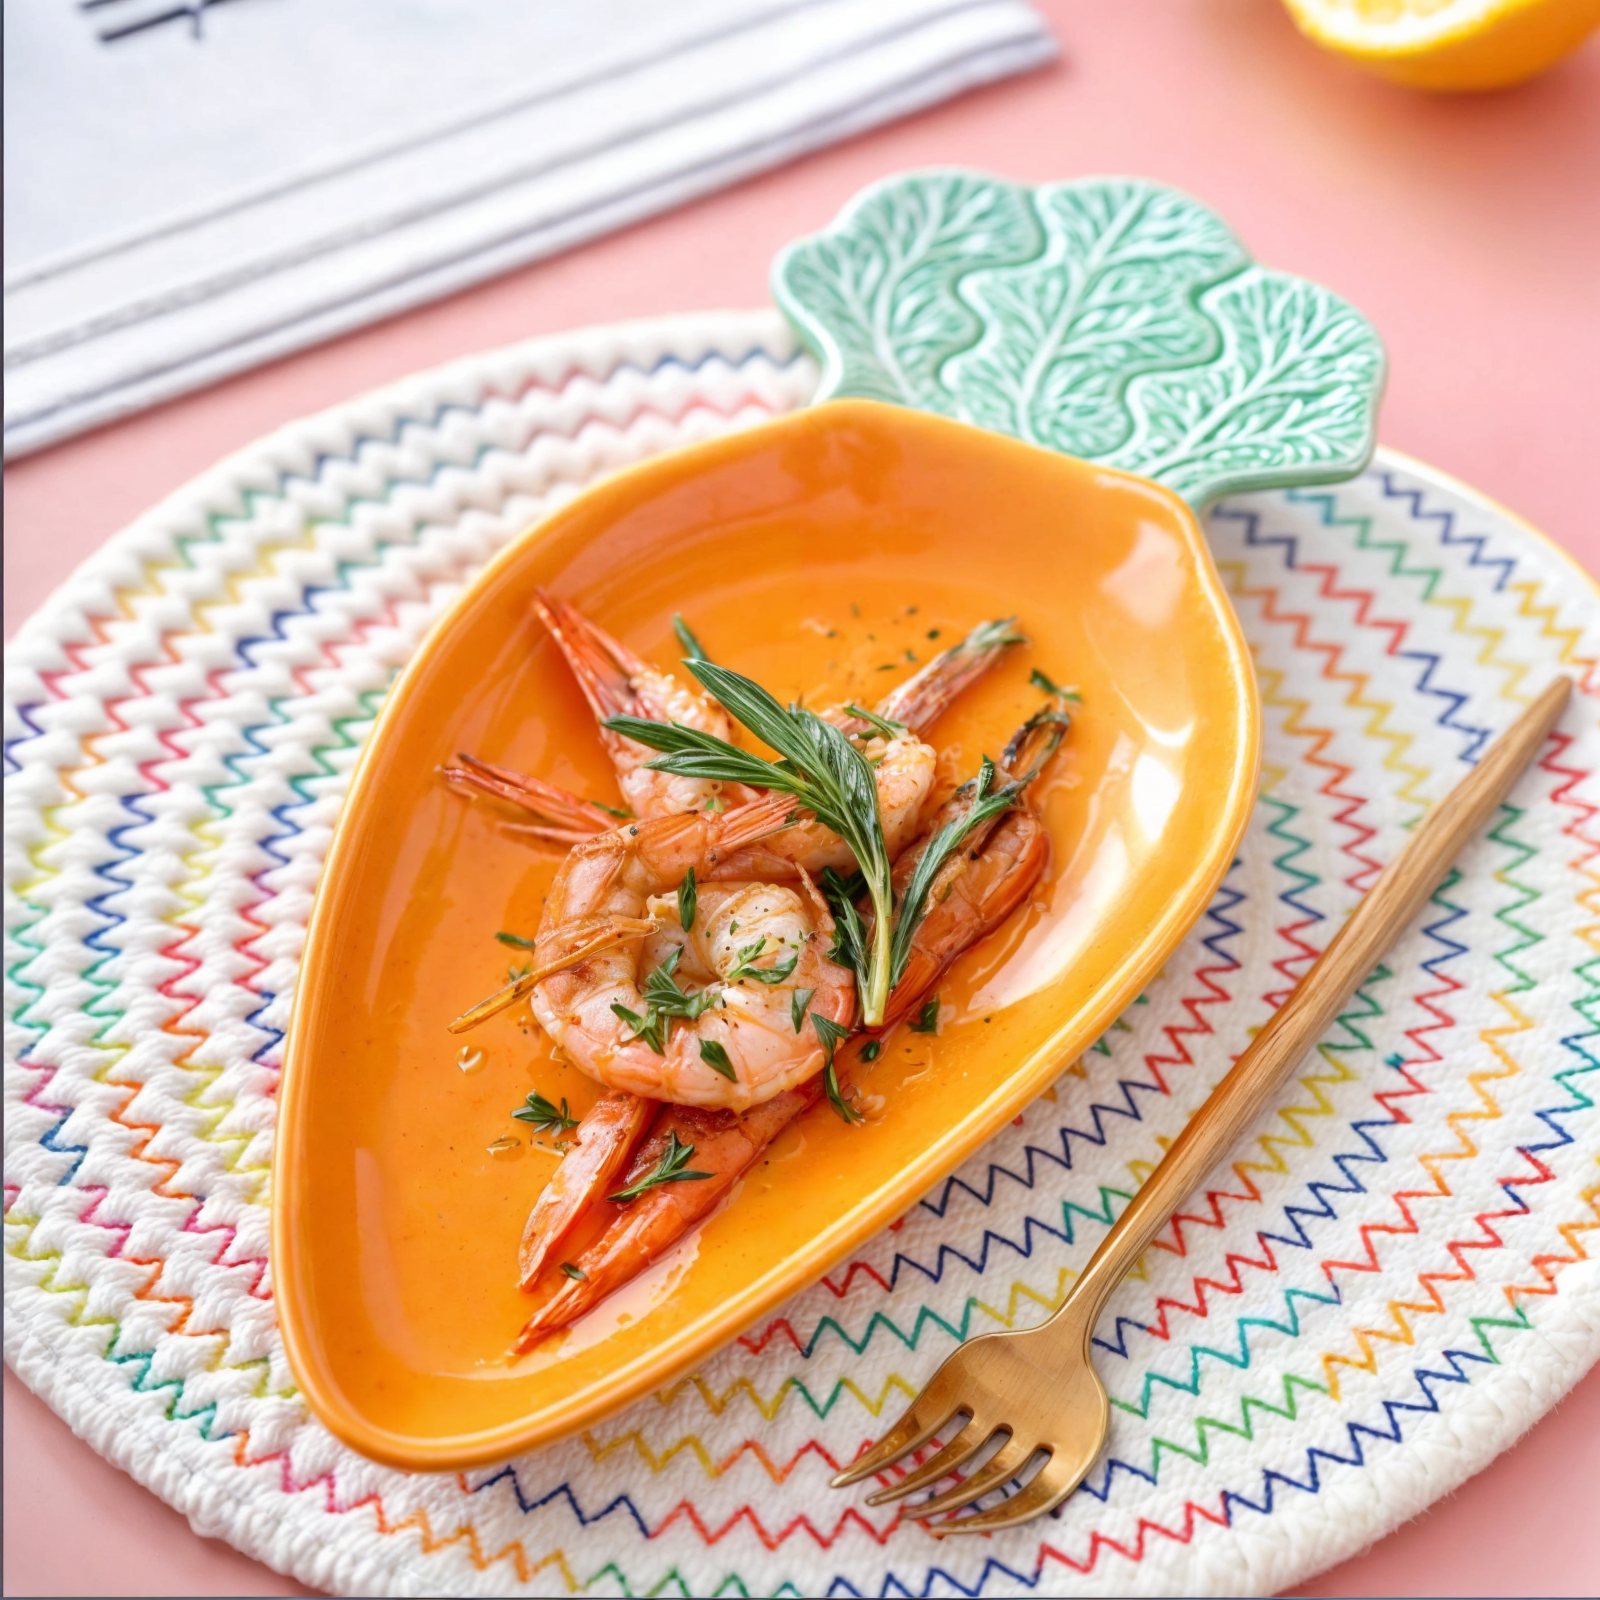 The Carrot Dishes